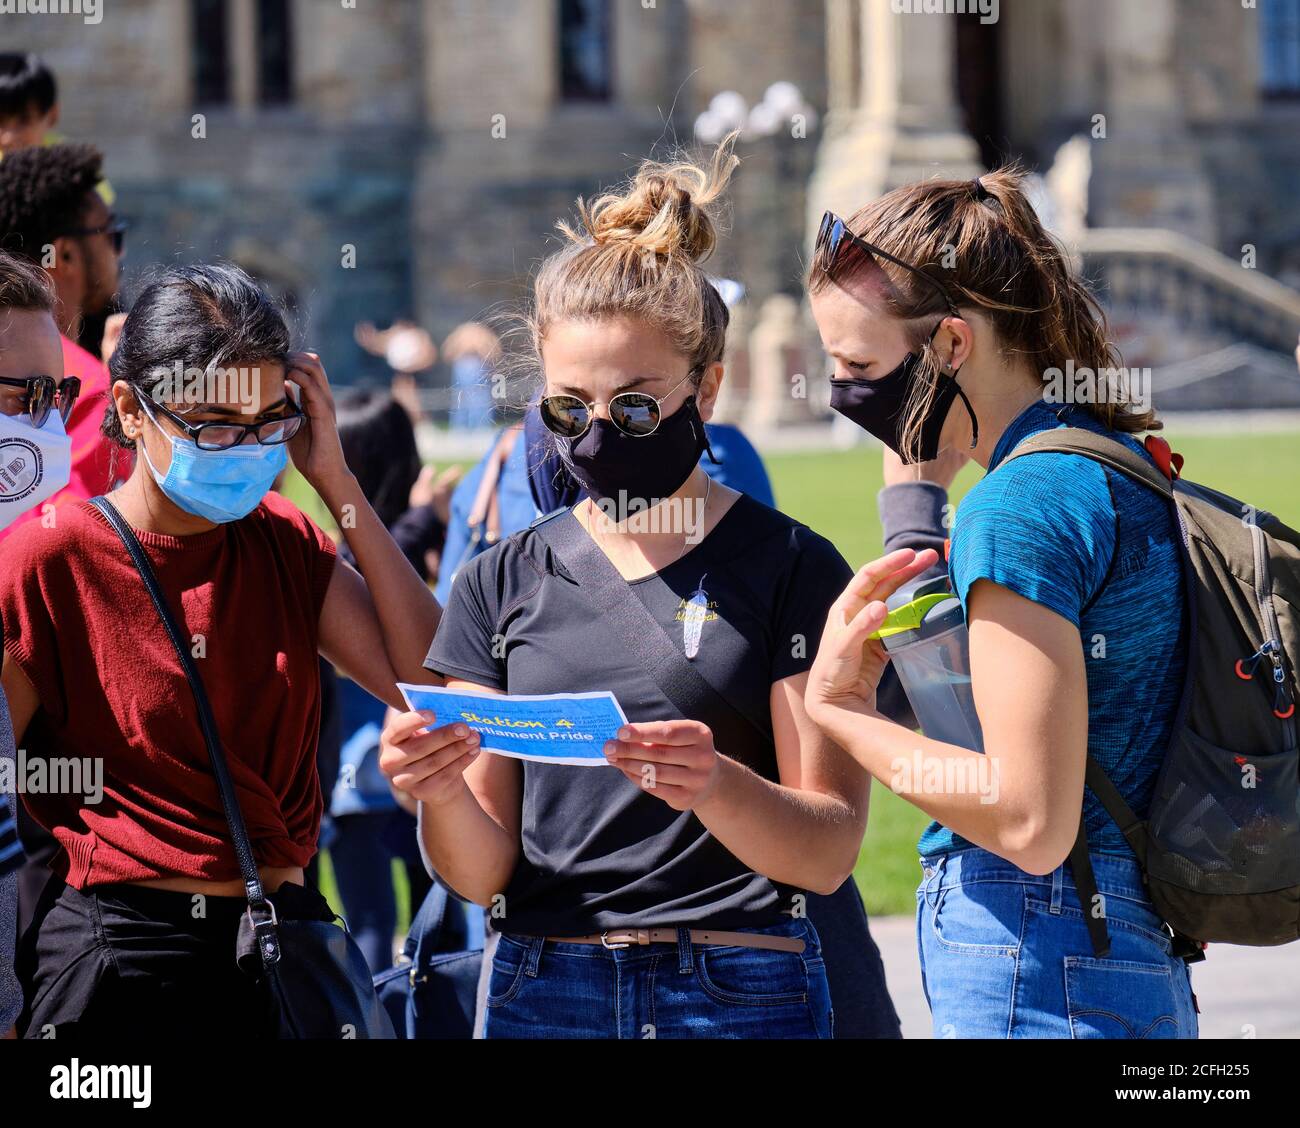 University of Ottawa students on an adventure race around the Capital as New year starts. Participants reading instructions of next challenge Stock Photo